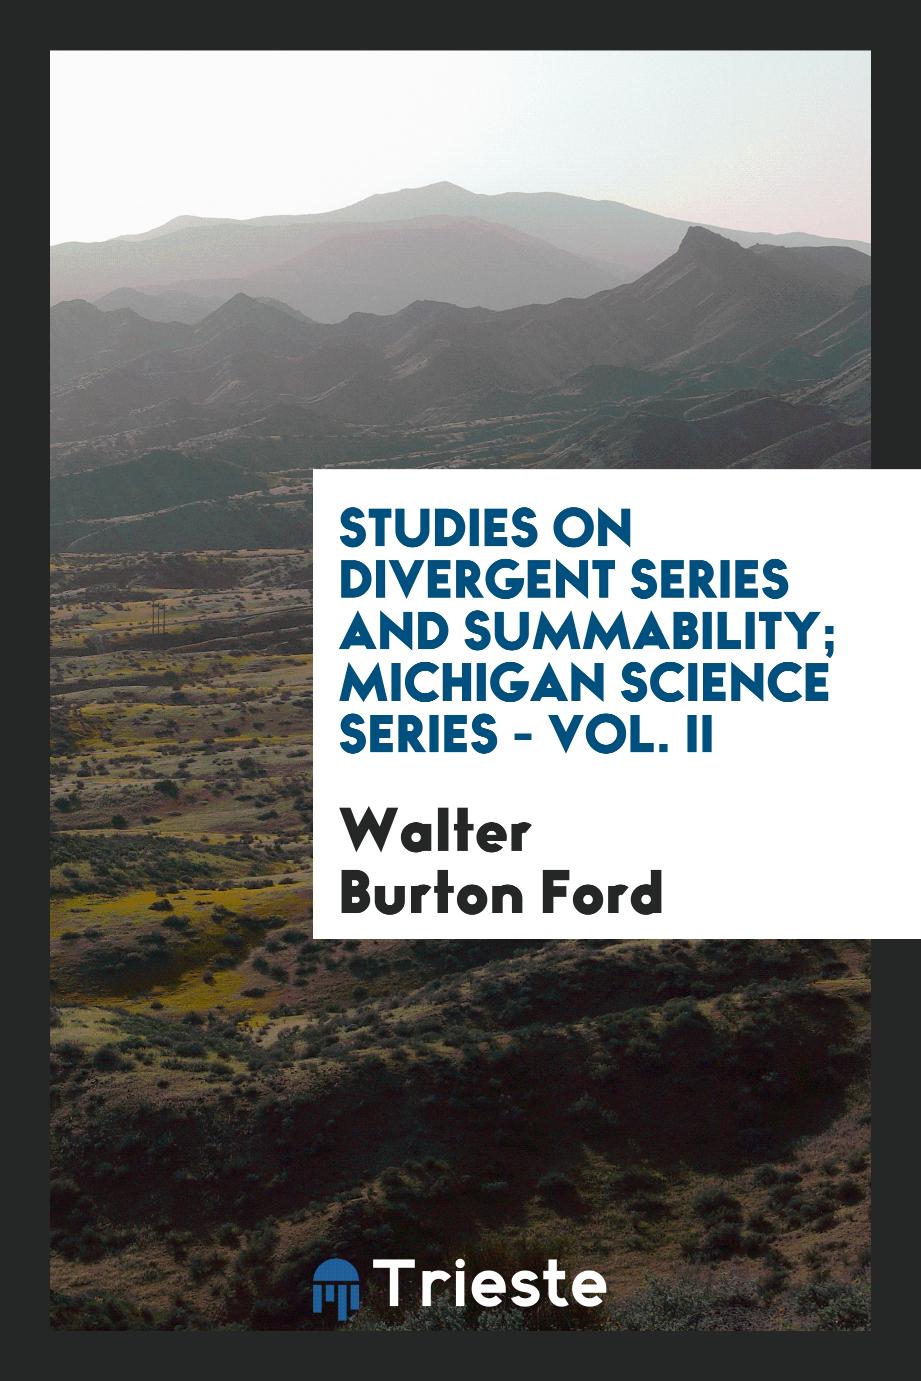 Studies on divergent series and summability; Michigan Science Series - Vol. II